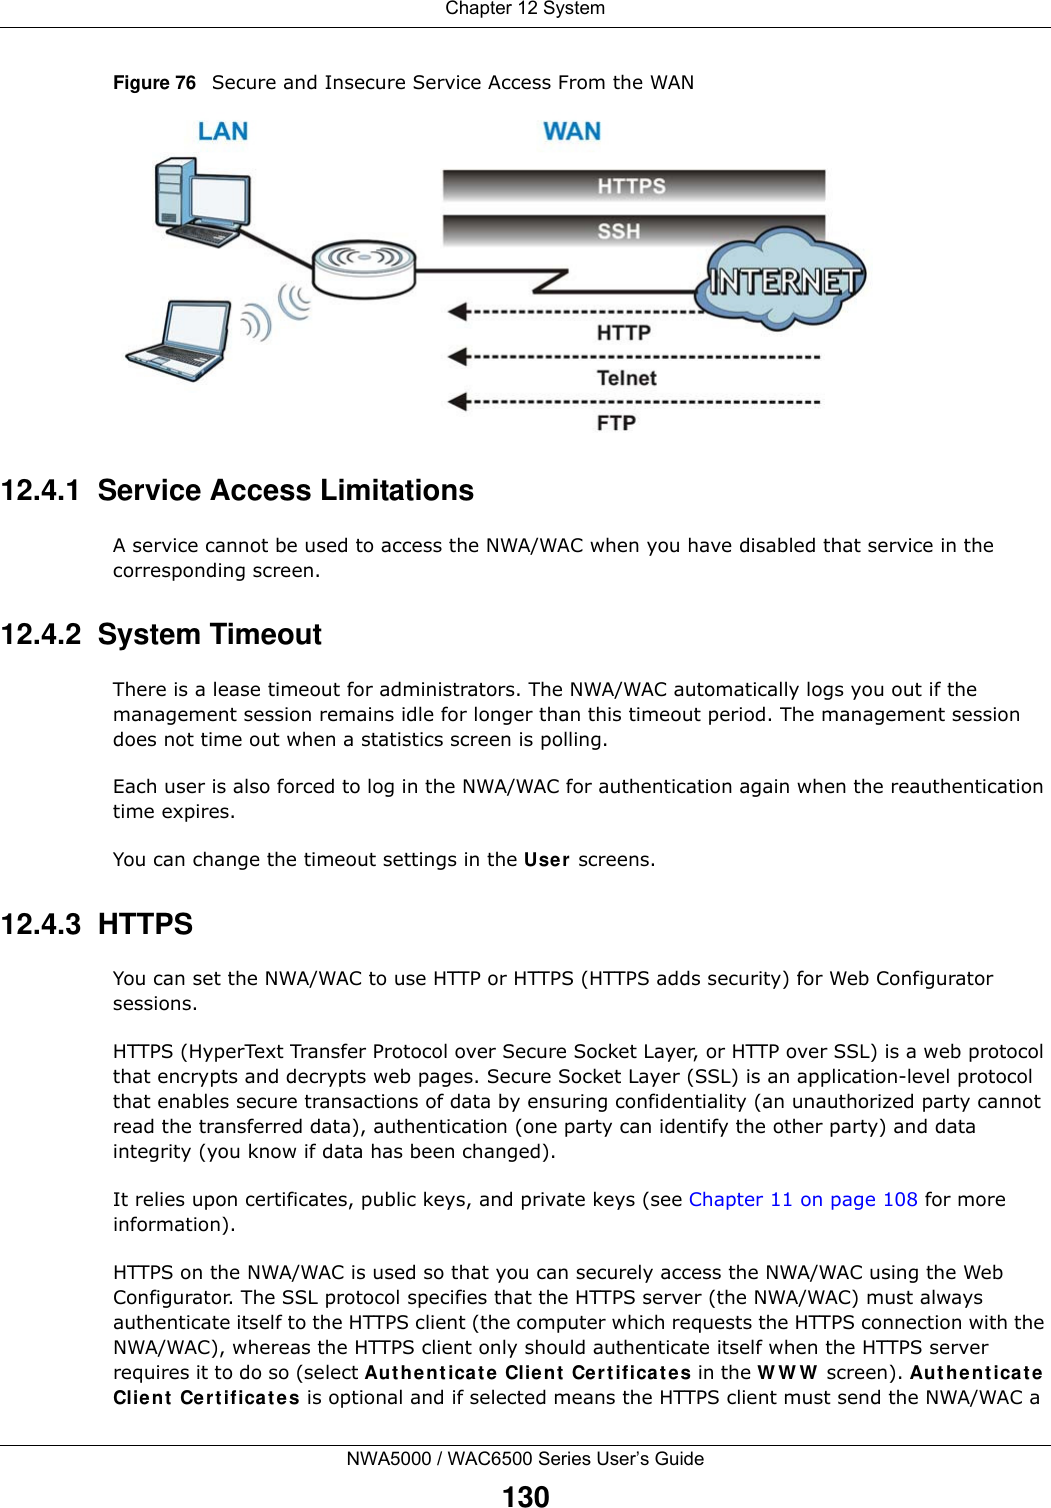 Chapter 12 SystemNWA5000 / WAC6500 Series User’s Guide130Figure 76   Secure and Insecure Service Access From the WAN12.4.1  Service Access LimitationsA service cannot be used to access the NWA/WAC when you have disabled that service in the corresponding screen.12.4.2  System TimeoutThere is a lease timeout for administrators. The NWA/WAC automatically logs you out if the management session remains idle for longer than this timeout period. The management session does not time out when a statistics screen is polling. Each user is also forced to log in the NWA/WAC for authentication again when the reauthentication time expires. You can change the timeout settings in the User  screens.12.4.3  HTTPSYou can set the NWA/WAC to use HTTP or HTTPS (HTTPS adds security) for Web Configurator sessions. HTTPS (HyperText Transfer Protocol over Secure Socket Layer, or HTTP over SSL) is a web protocol that encrypts and decrypts web pages. Secure Socket Layer (SSL) is an application-level protocol that enables secure transactions of data by ensuring confidentiality (an unauthorized party cannot read the transferred data), authentication (one party can identify the other party) and data integrity (you know if data has been changed). It relies upon certificates, public keys, and private keys (see Chapter 11 on page 108 for more information).HTTPS on the NWA/WAC is used so that you can securely access the NWA/WAC using the Web Configurator. The SSL protocol specifies that the HTTPS server (the NWA/WAC) must always authenticate itself to the HTTPS client (the computer which requests the HTTPS connection with the NWA/WAC), whereas the HTTPS client only should authenticate itself when the HTTPS server requires it to do so (select Auth ent ica te  Clie nt  Cert ificat es in the W W W  screen). Aut hent icat e Client  Cert ificat es is optional and if selected means the HTTPS client must send the NWA/WAC a 